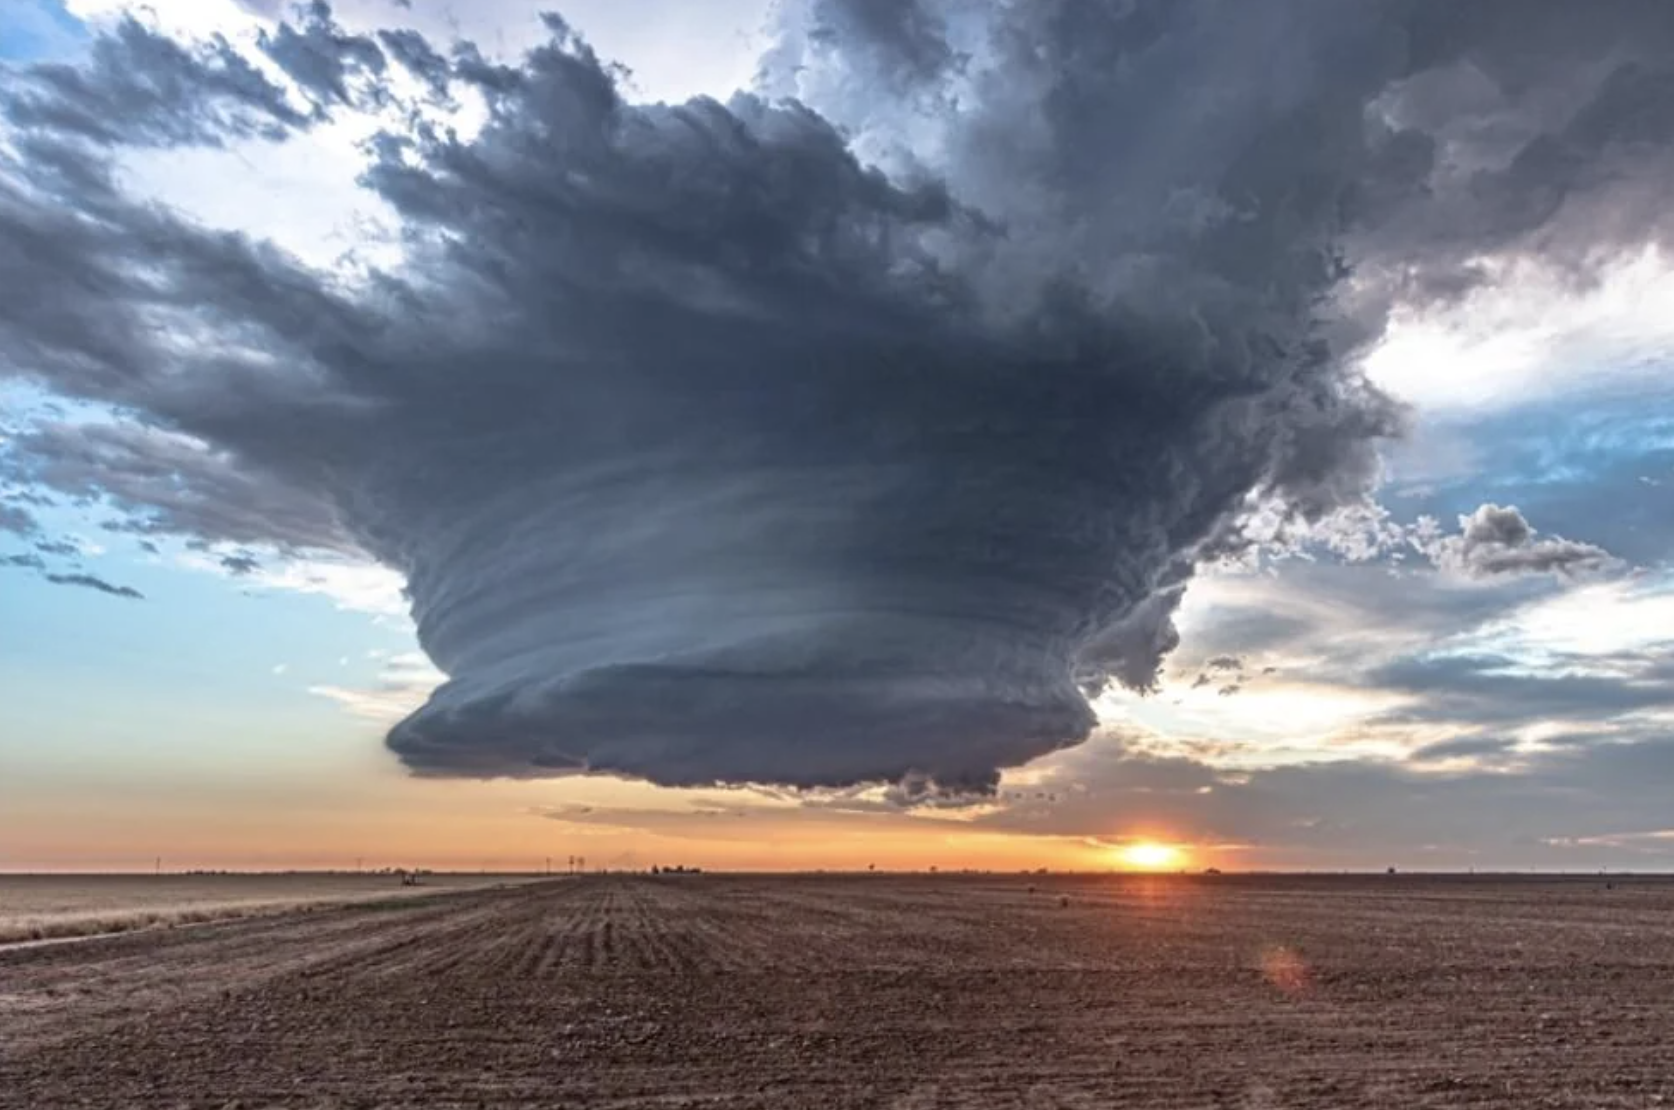 60,000' high supercell in west Texas, gearing up to spawn a tornado and hailstorm